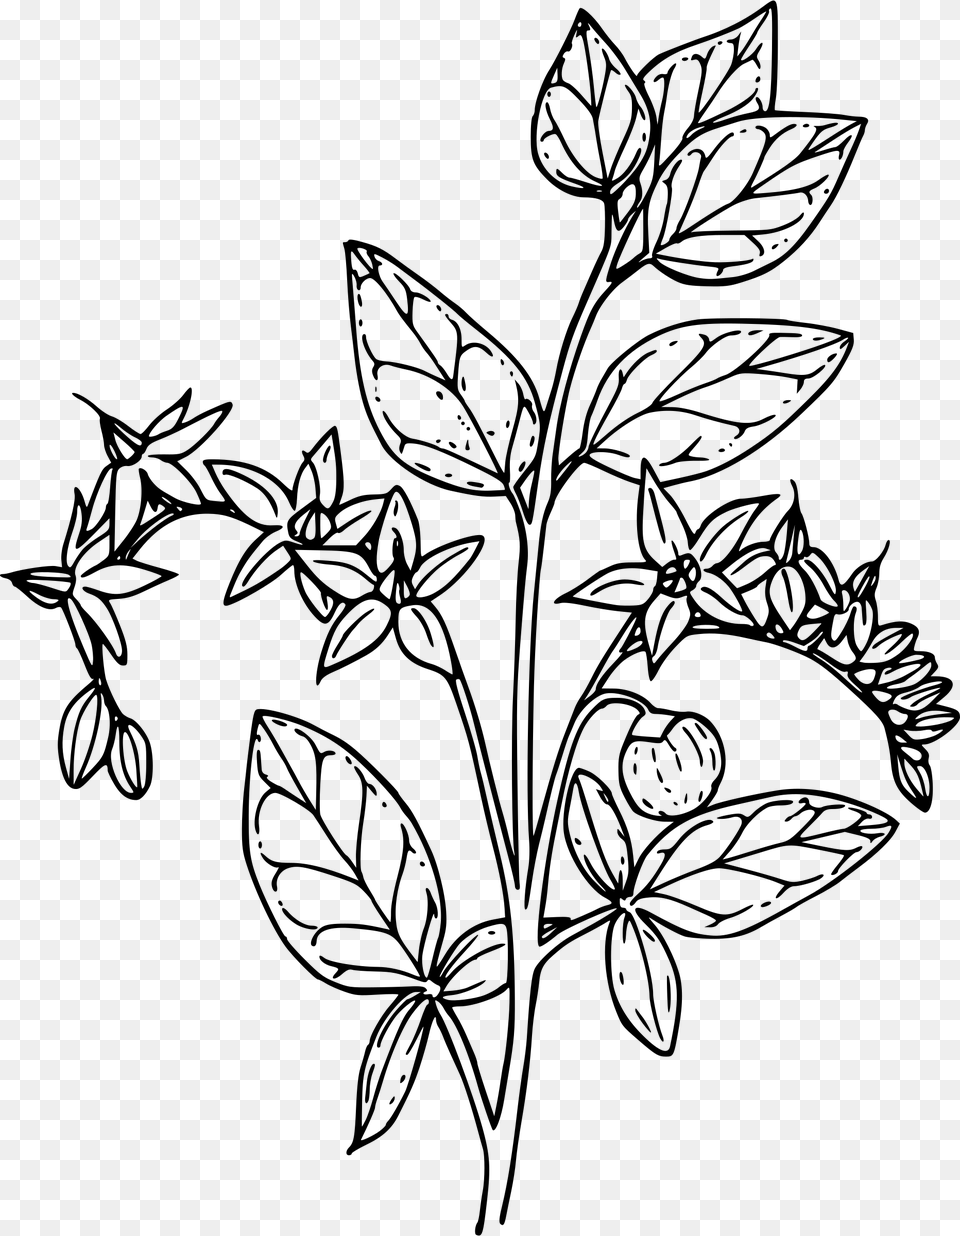 Matrimony Vine Clip Arts Coloring Pages, Gray Png Image